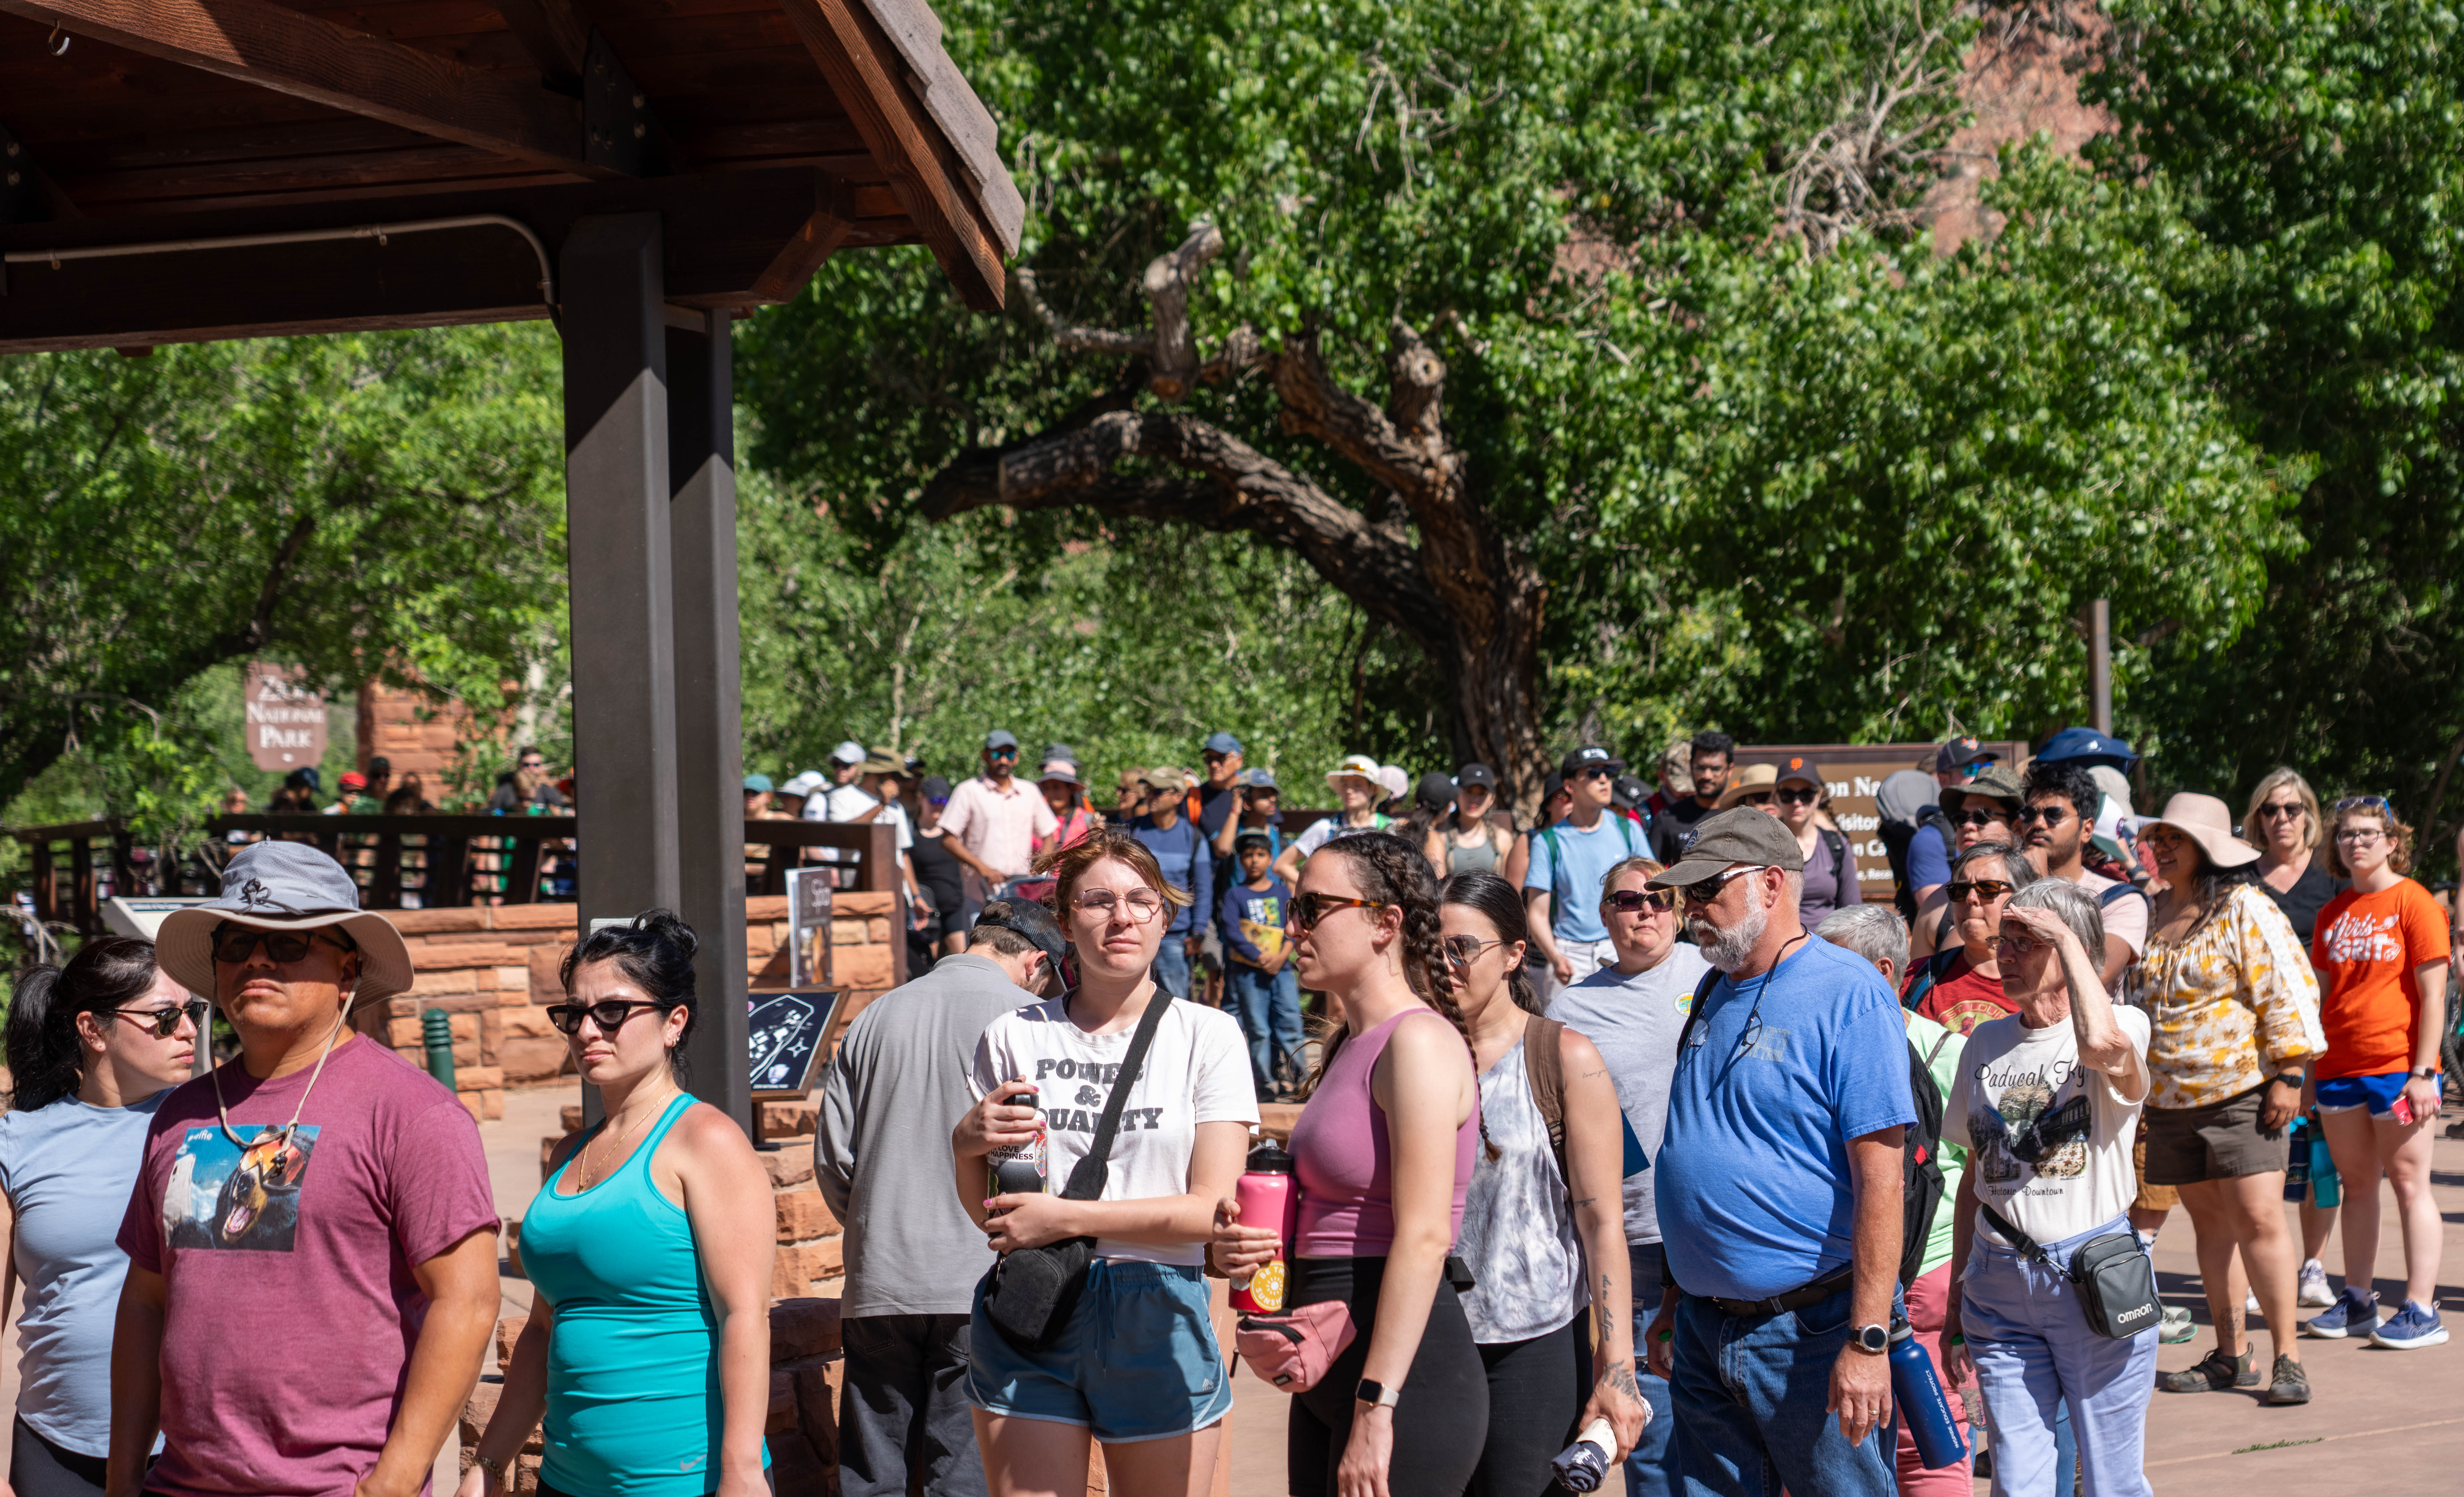 People stand in line near the entrance of Zion National Park